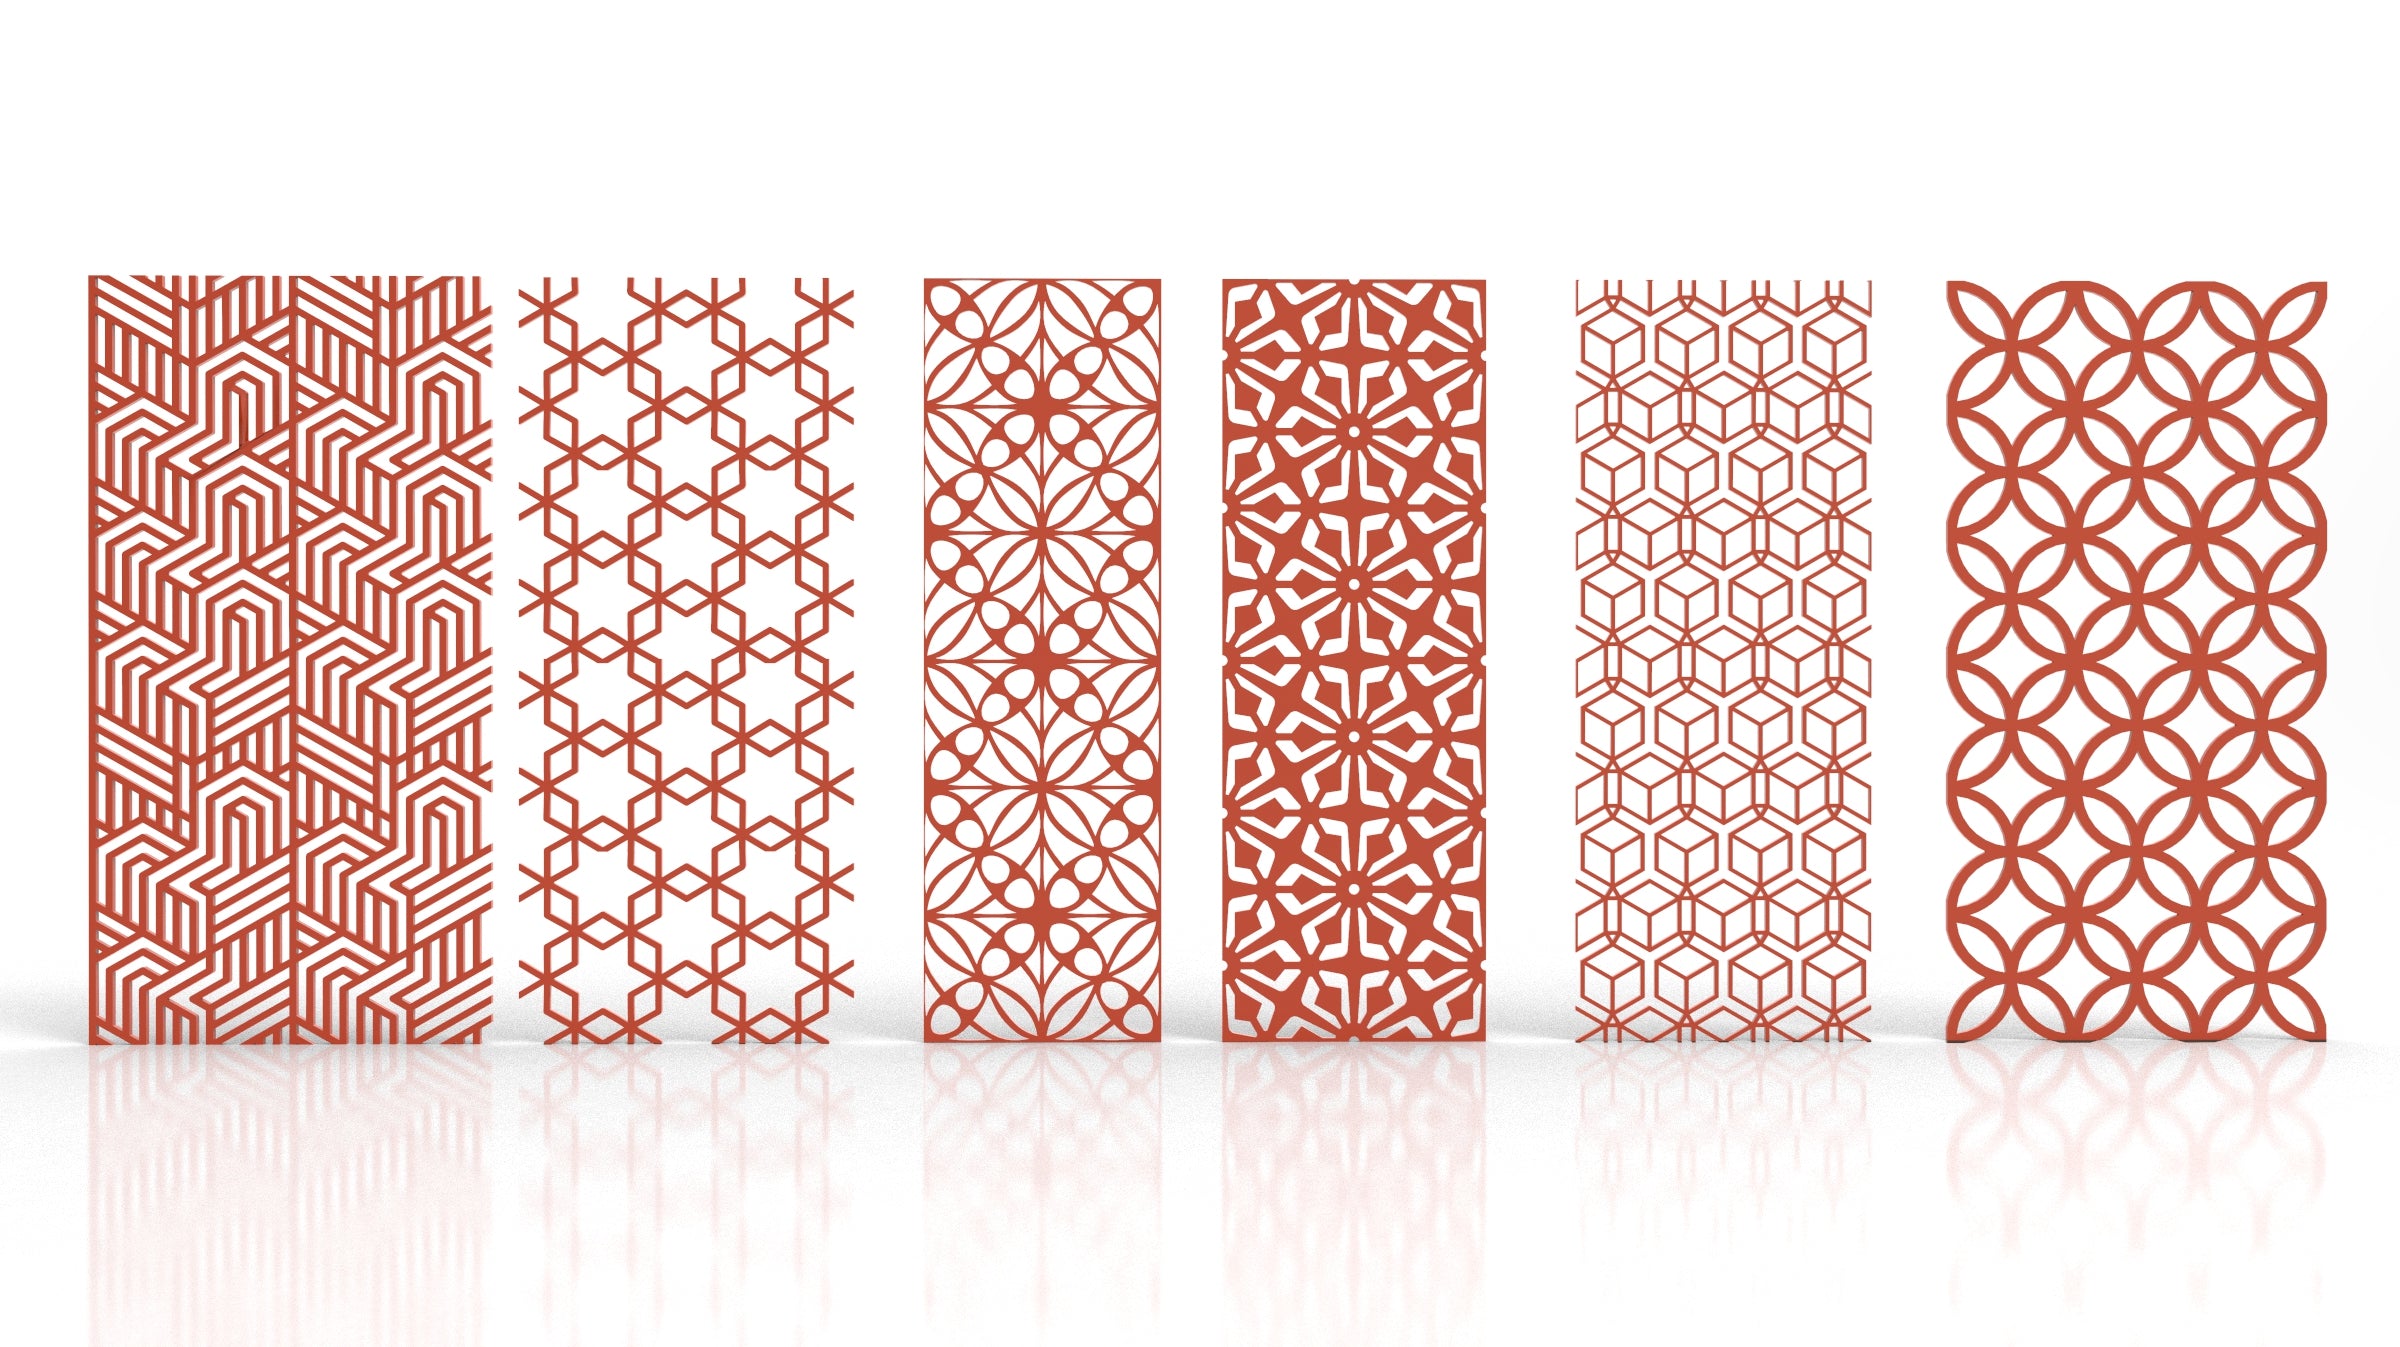 Ornaments for decorative partitions panel screen CNC Laser Cutting File | SVG, DXF, AI |#C003|